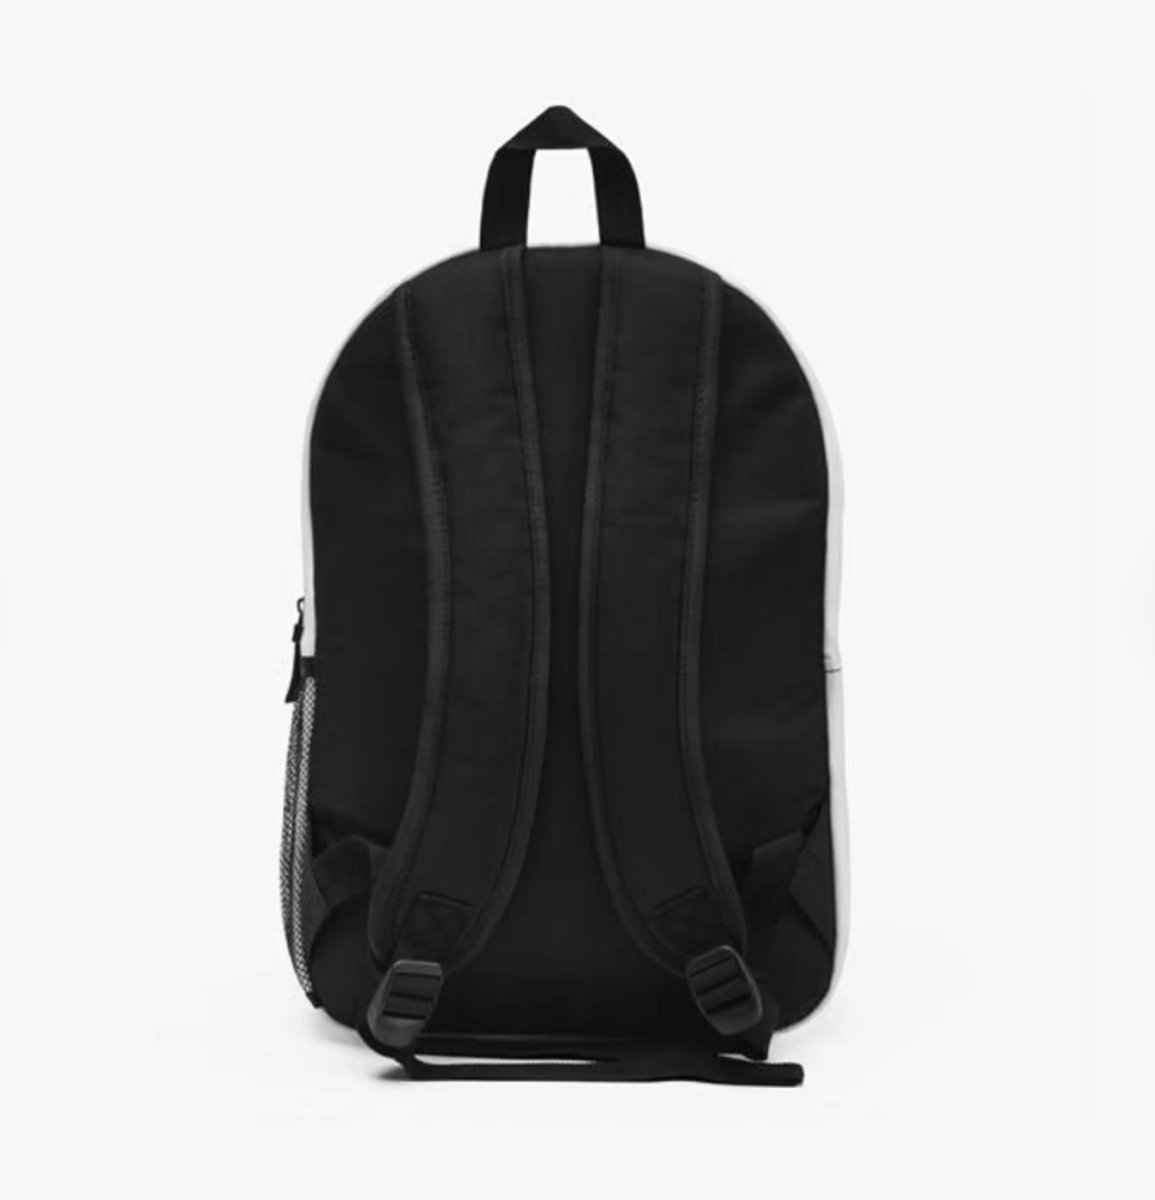 Grad Goals Backpack - The Trini Gee